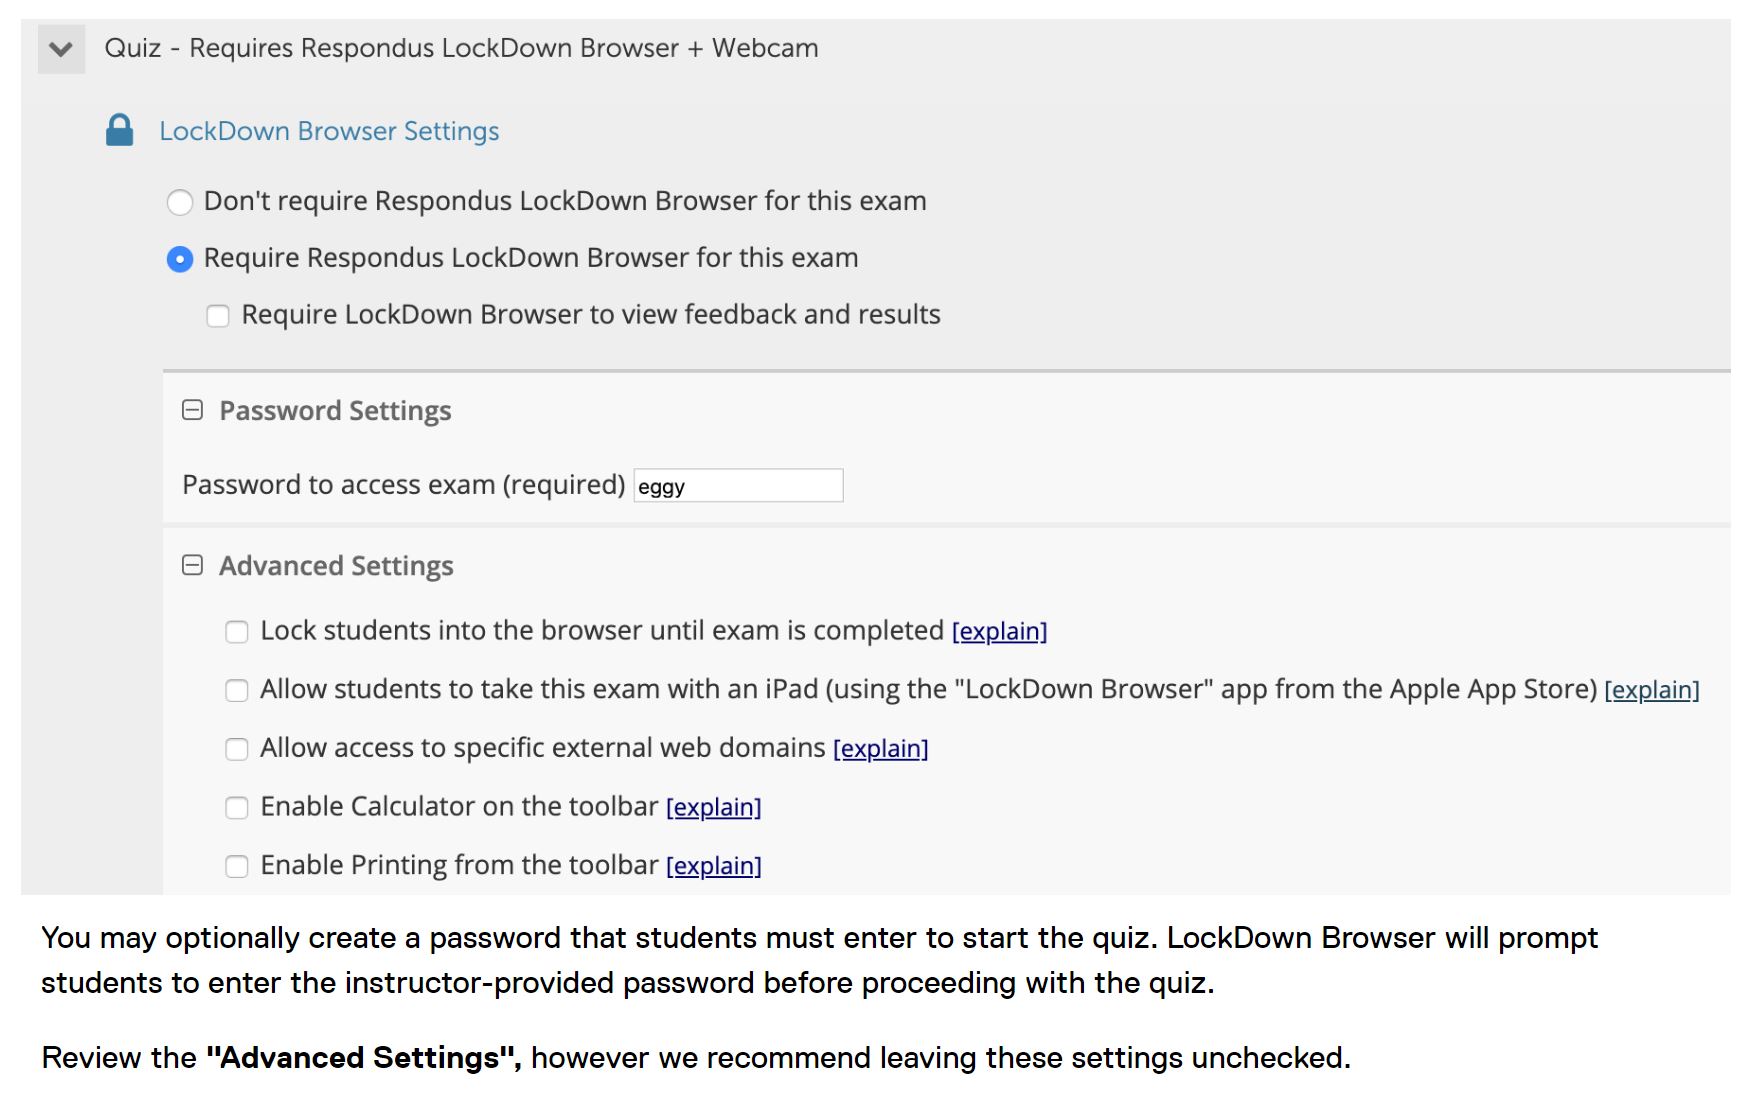 LockDown Browser settings and enabling a password